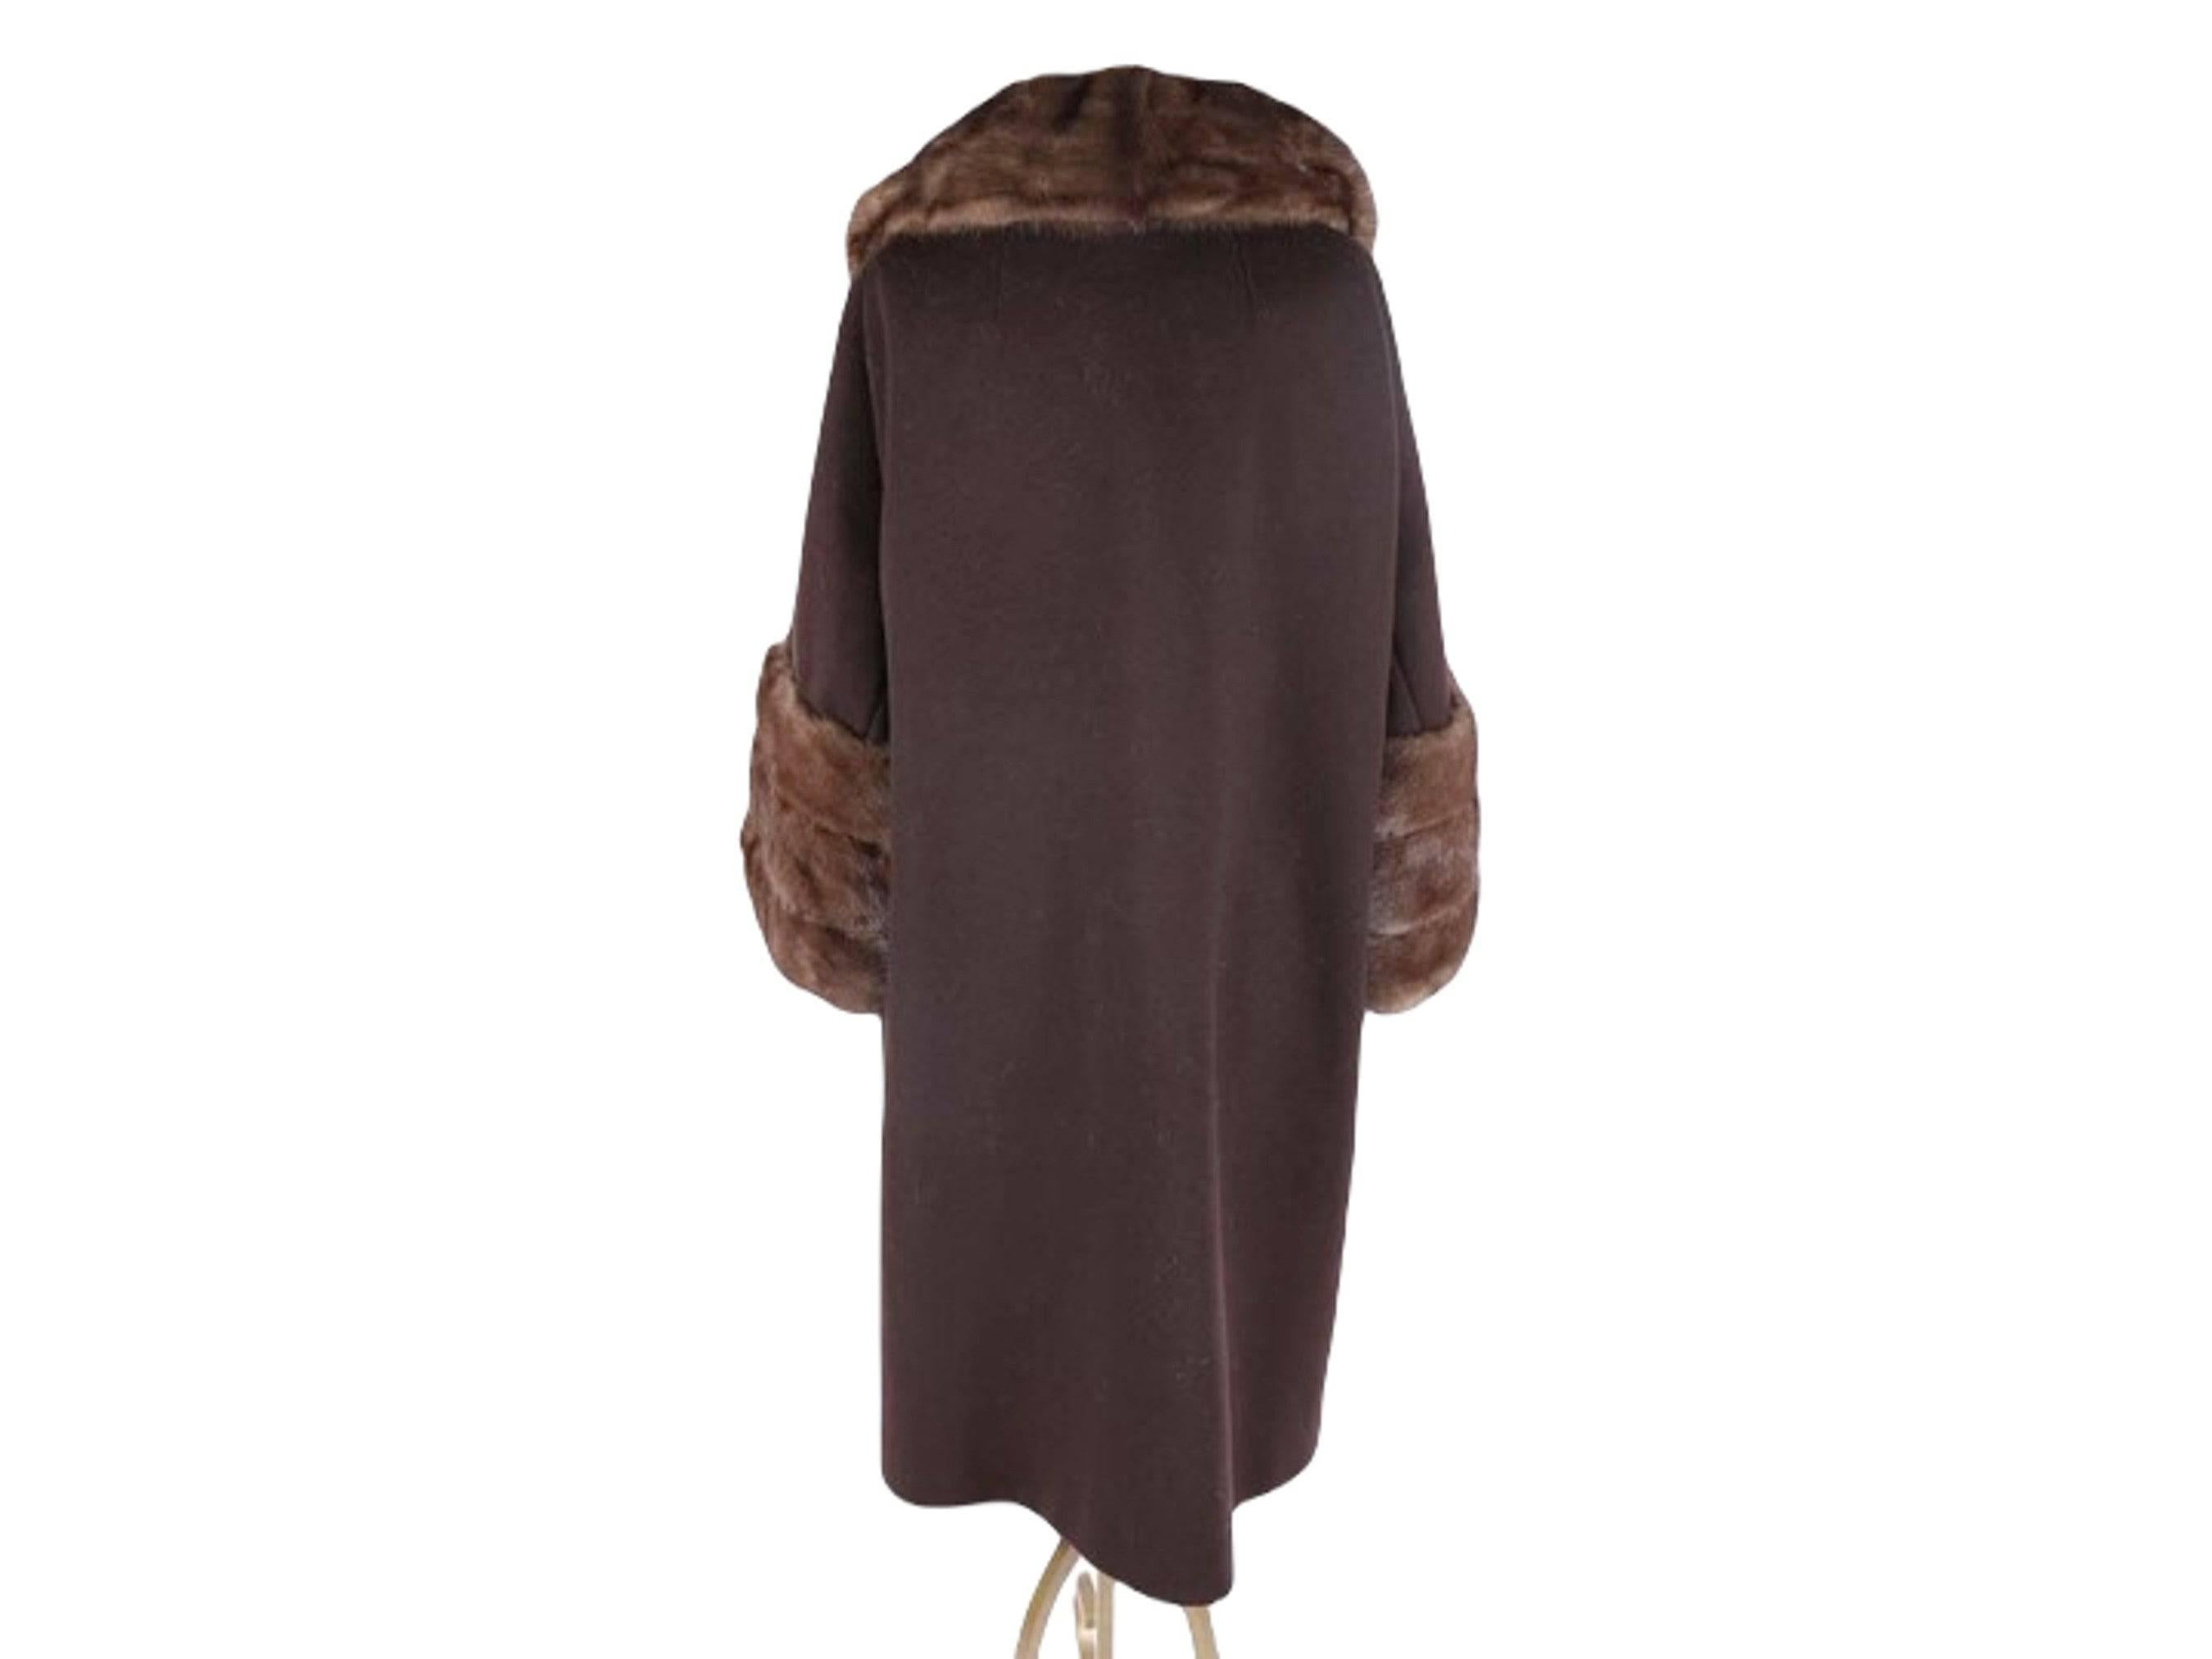 Blin+Blin Custom Couture Mink Fur Fabulous French Vintage Wool Winter Coat 1950s In Excellent Condition For Sale In North Attleboro, MA